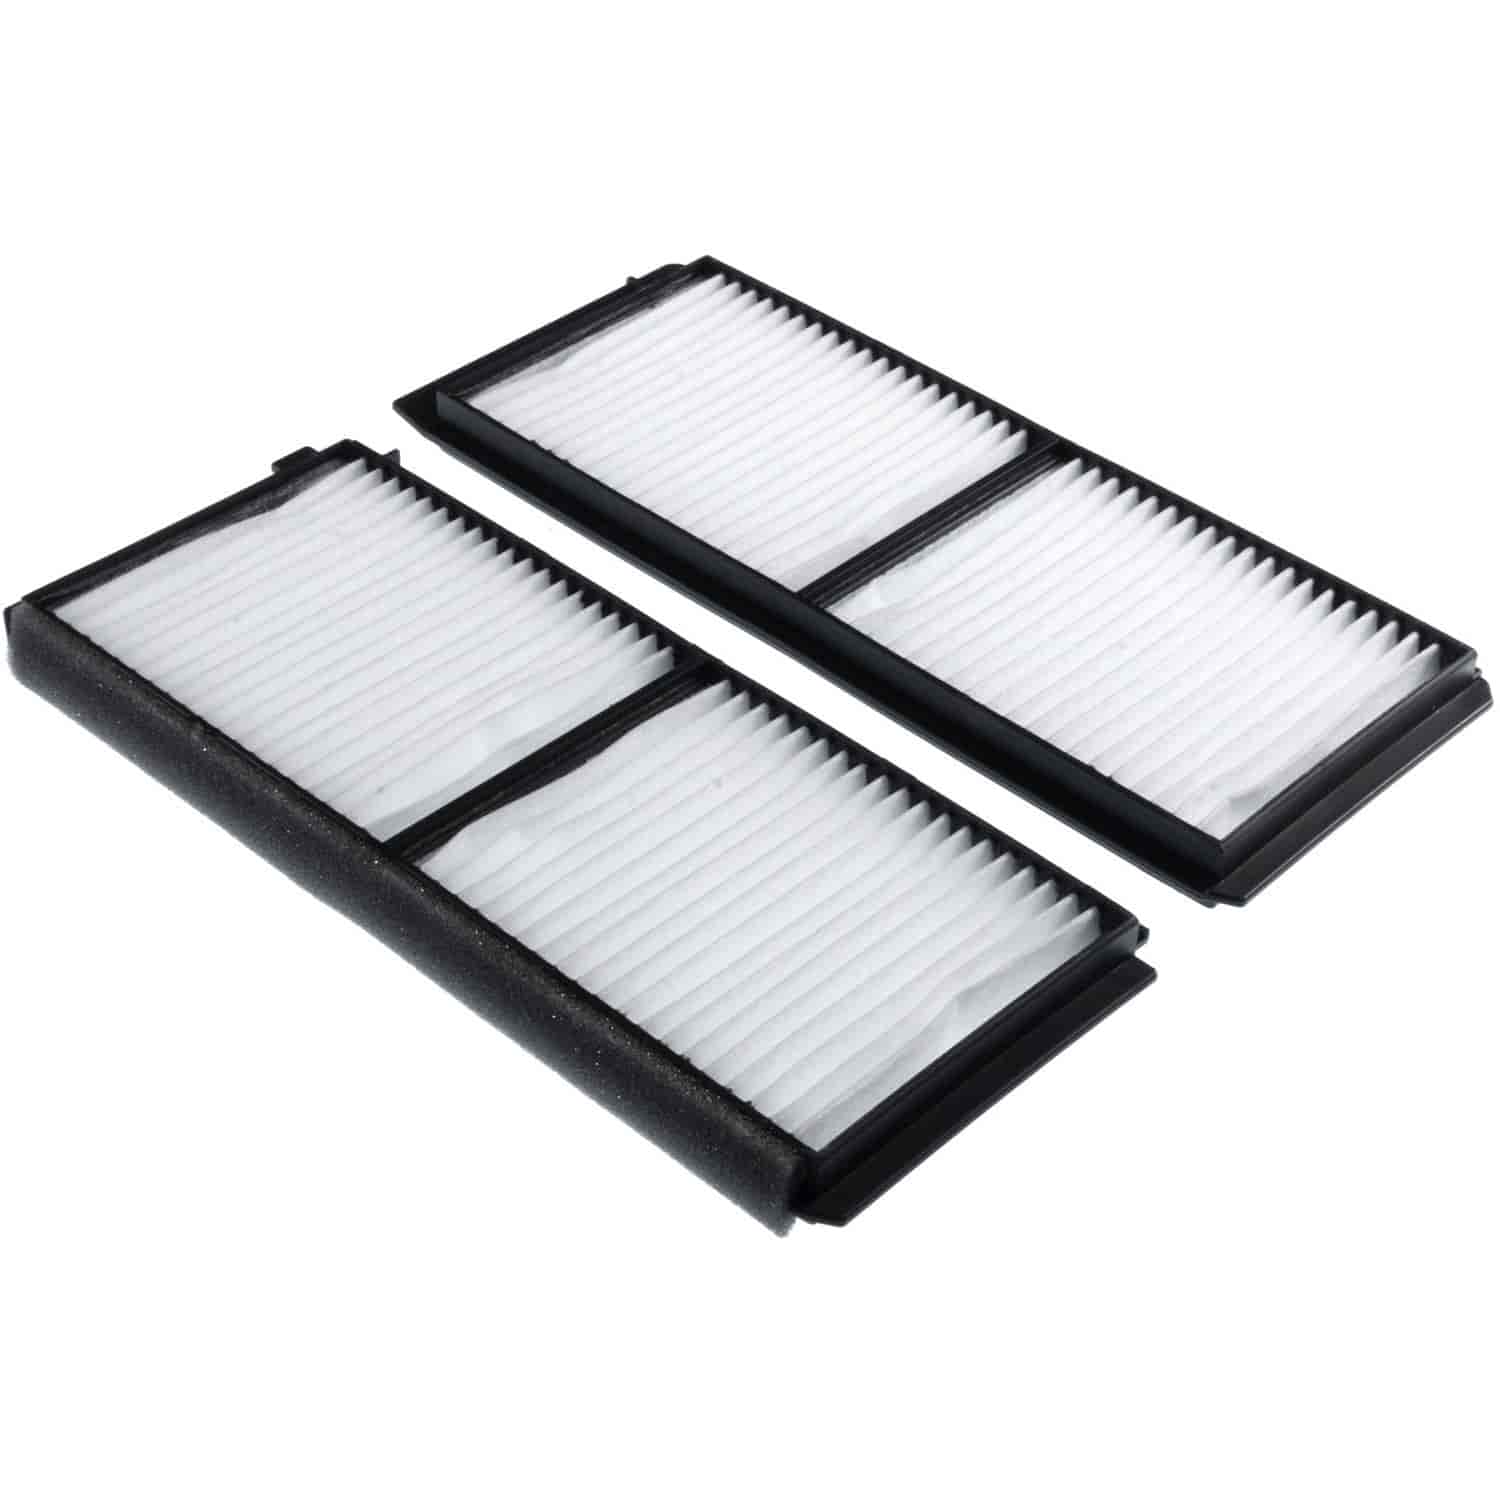 Mahle Cabin Air Filter Mazda 2 1.5L 1498cc VIN Y and Z MZR 2011-2012